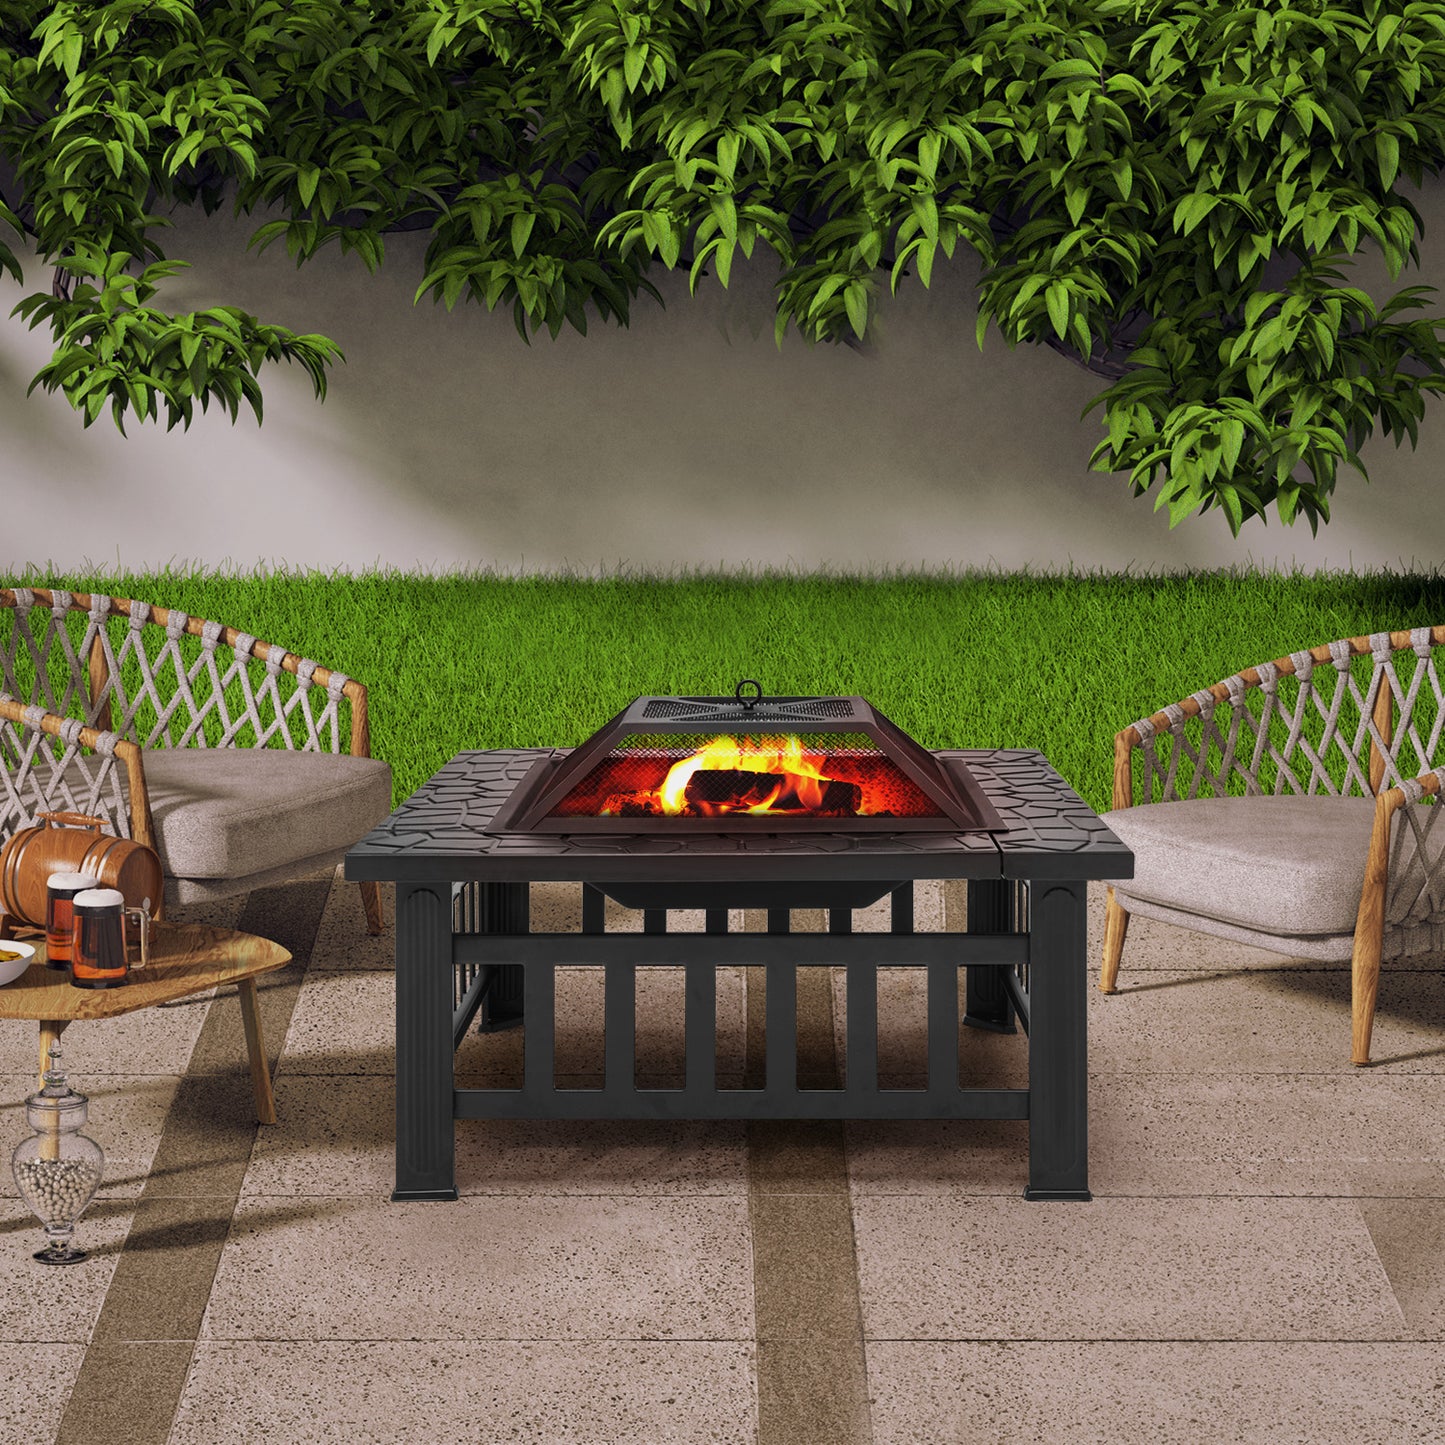 32" Square Fire Pit Table w/Log Grate+Poker & Spark Screen